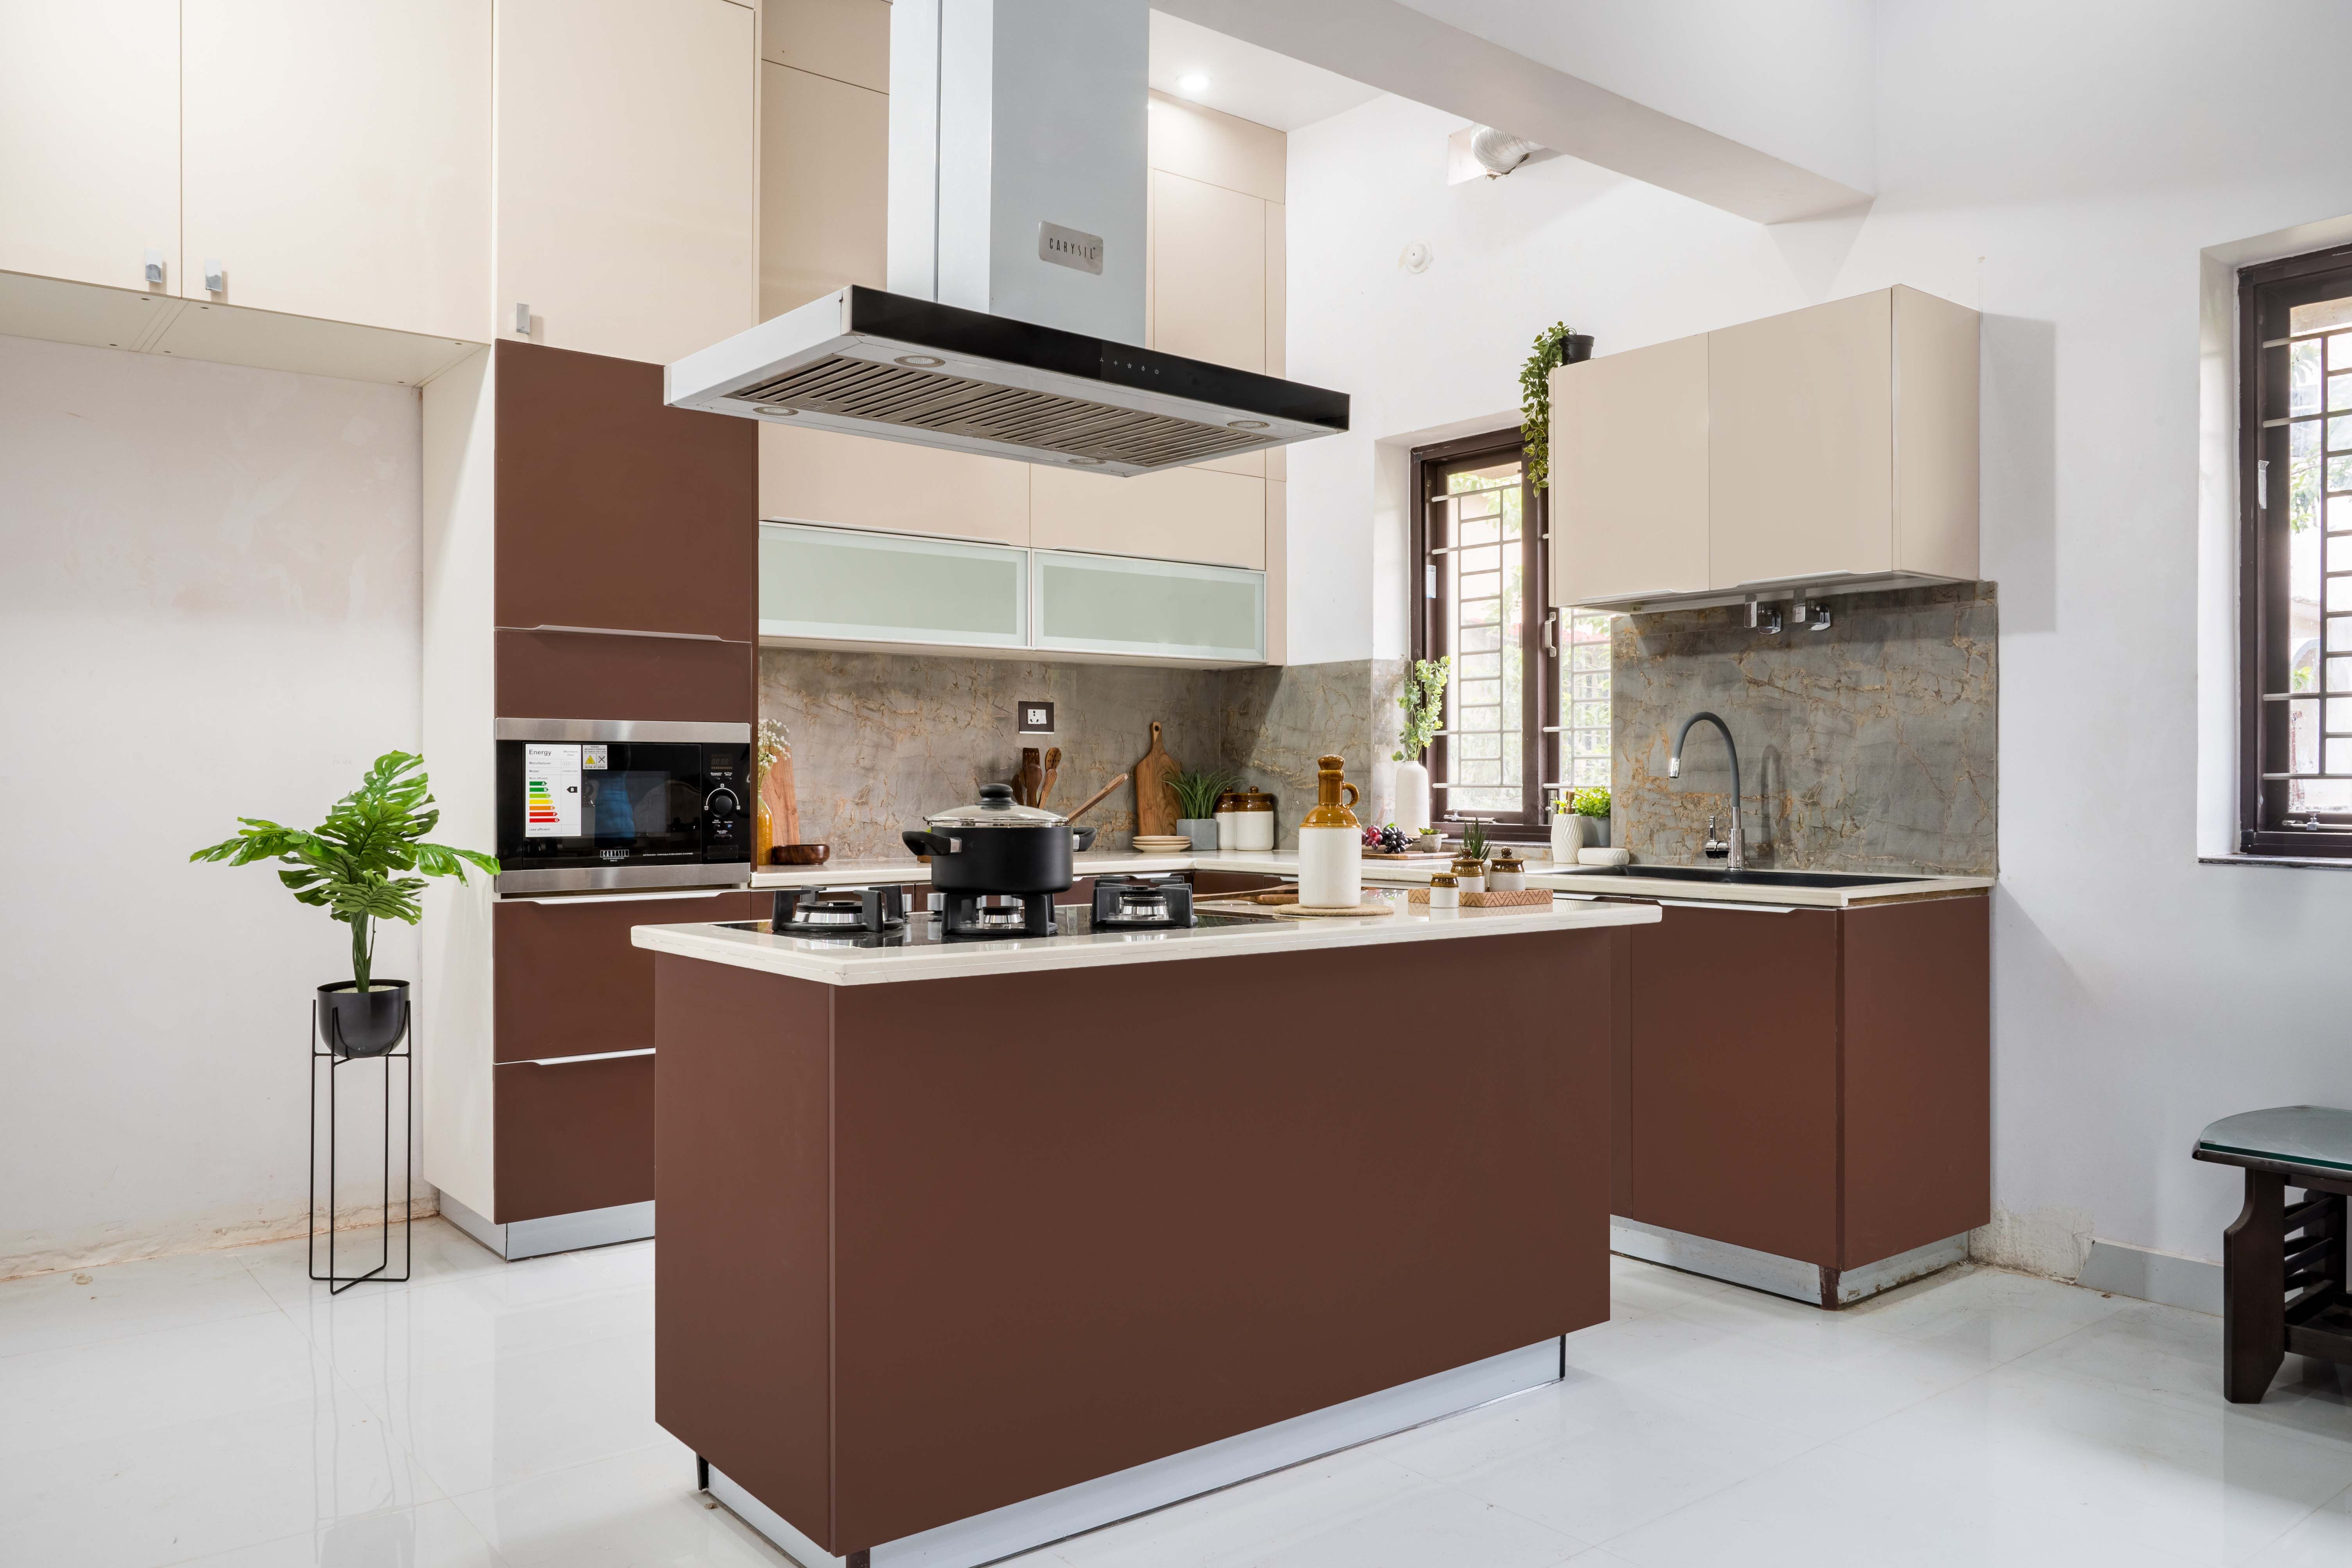 Modern Island Kitchen Design with Tan SF Base and Tall Units